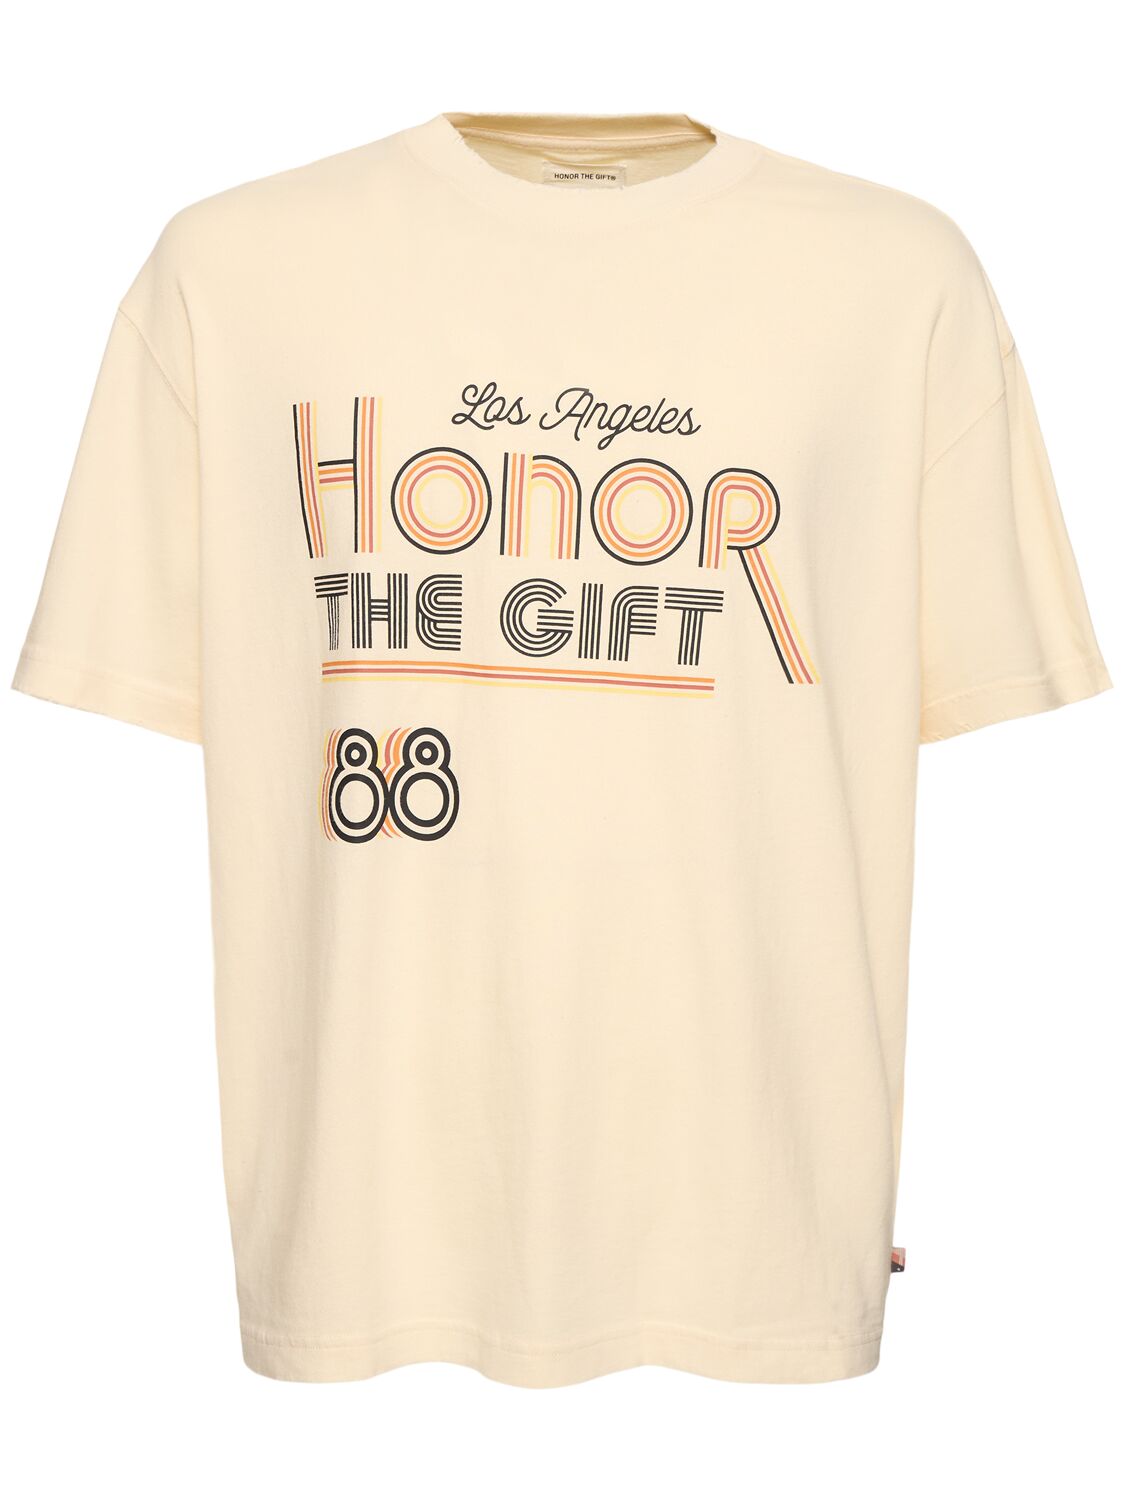 Honor The Gift A-spring Retro Honor Cotton T-shirt In Tan